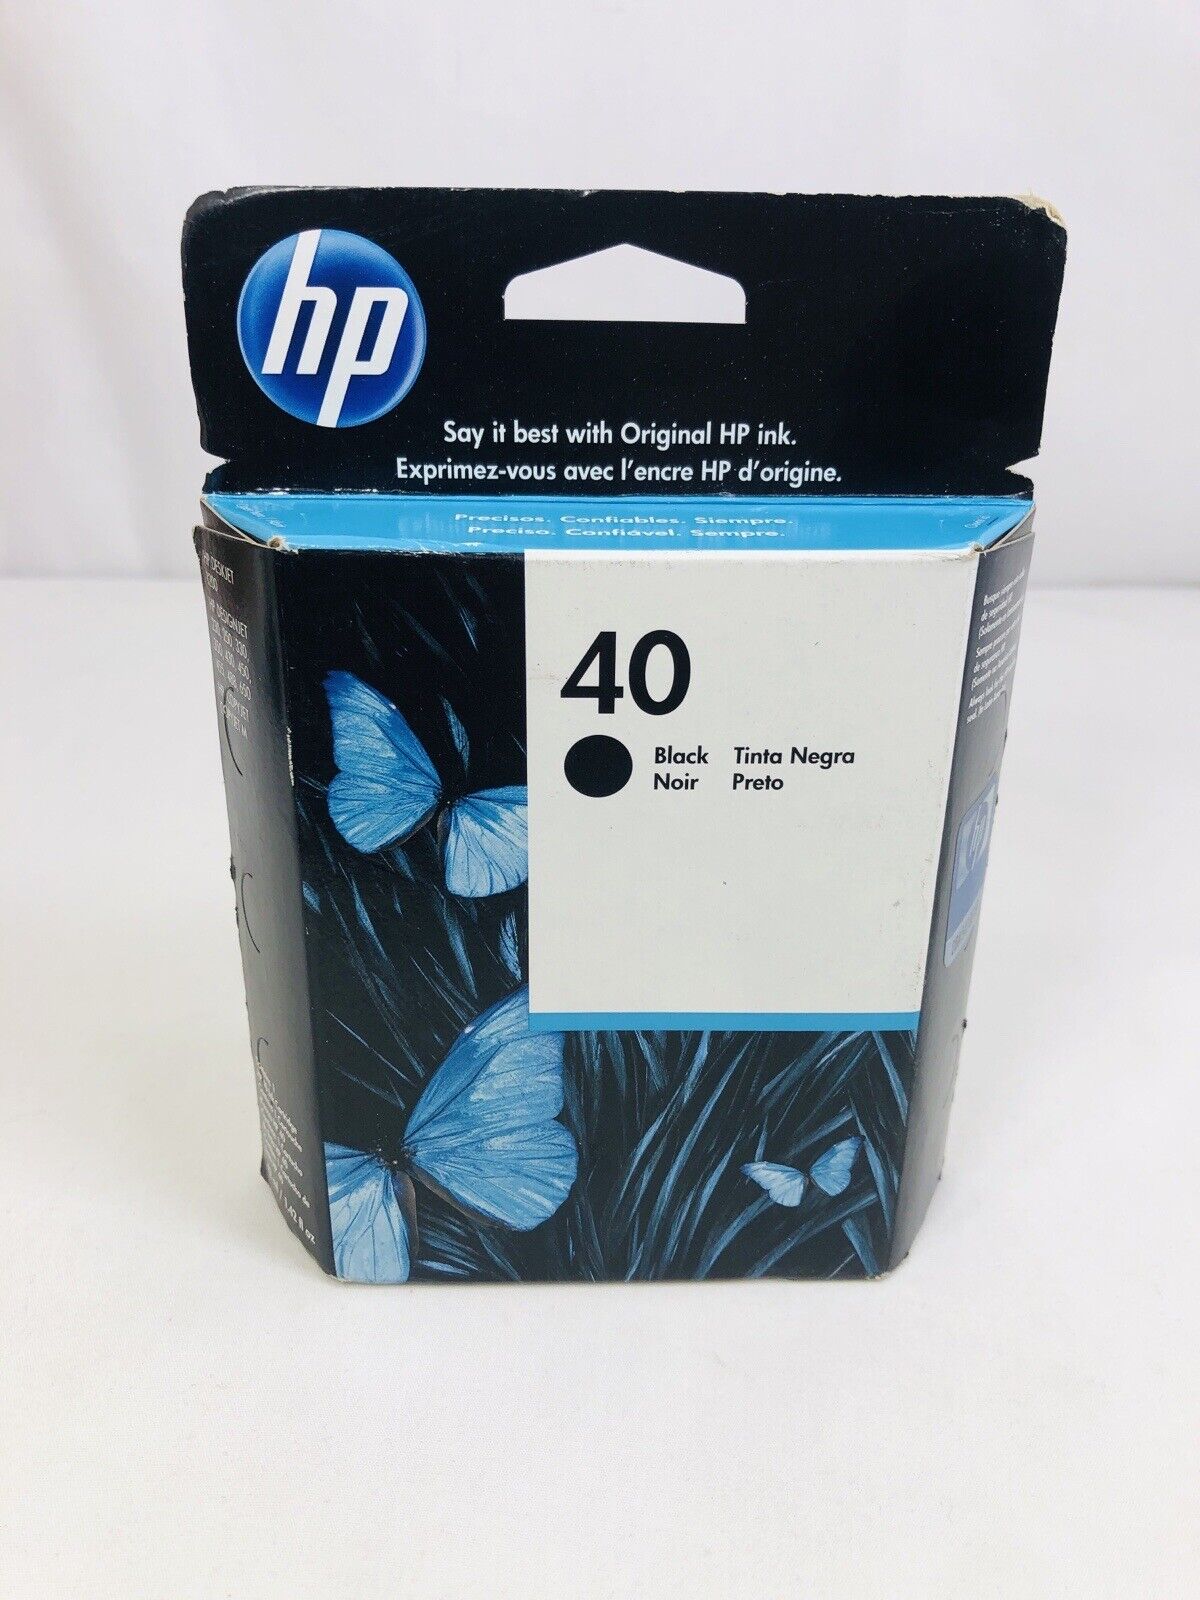 Genuine HP Ink Cartridge 40 Black 51640A Sealed Box 03/2012 DATED NEW OLD STOCK